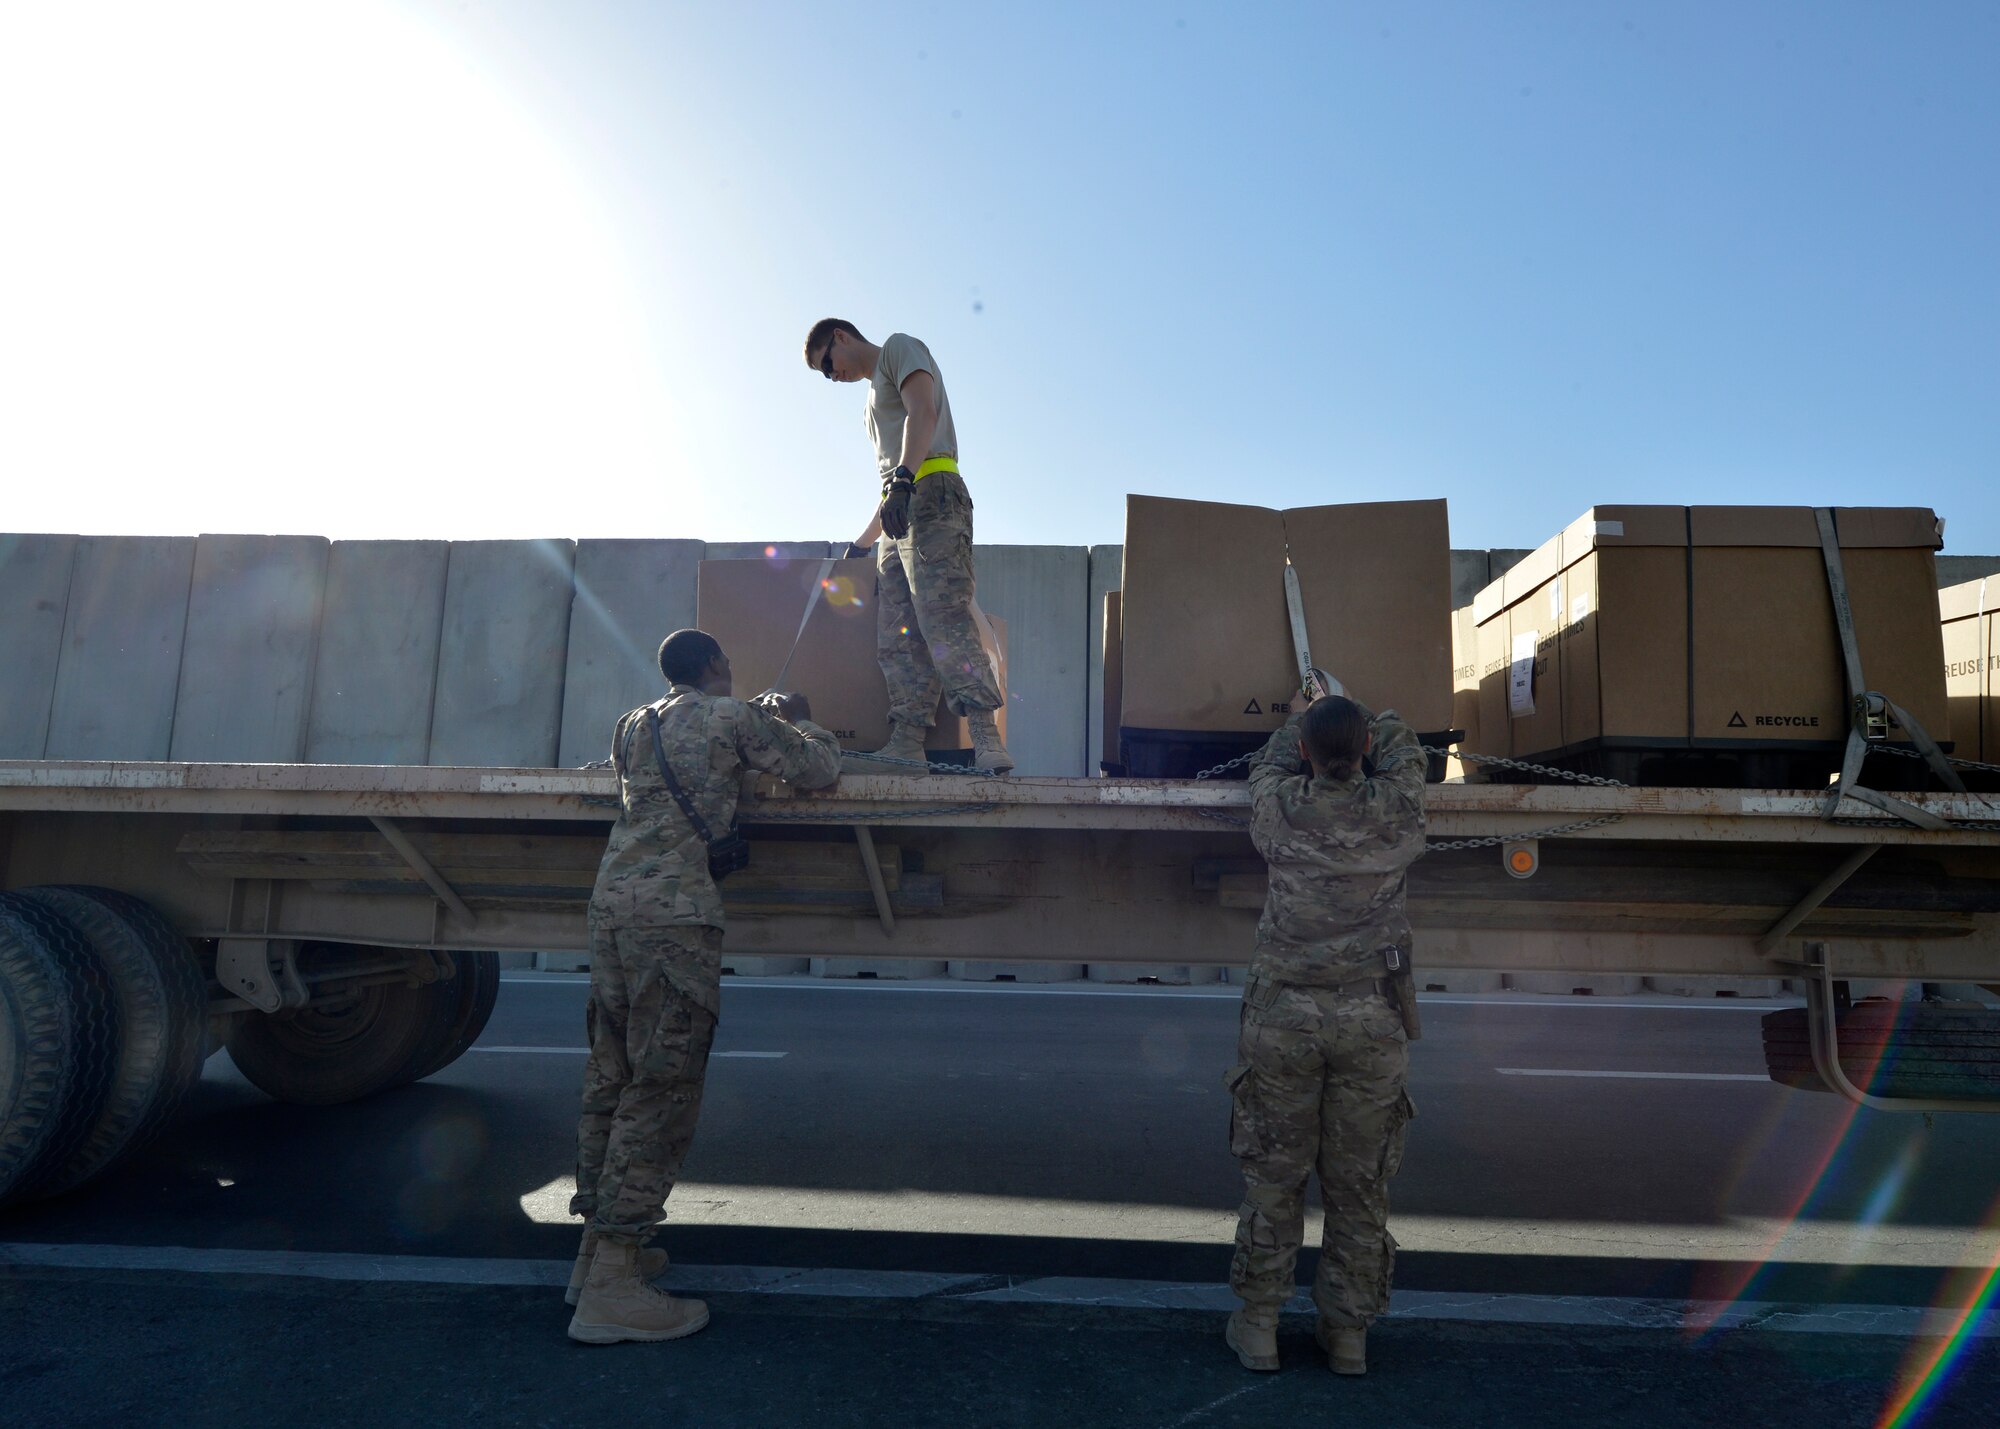 (From left) U.S. Air Force Senior Airman Lorenza Kates, 455th Expeditionary Communications Squadron mail clerk, Airman 1st Class Joshua Zehms, 455th Expeditionary Logistics Readiness Squadron vehicle operations and Senior Airman  Victoria Hill, 455 ECS mail clerk load a flatbed truck at Bagram Airfield, Afghanistan June 26, 2014.  Hill and Kates are responsible for delivering mail to Airmen assigned to the 455th Air Expeditionary Wing.  They average 77 pallets of mail per week that amounts to approximately to 38,500 pounds.  Kates is deployed from Davis Monthan Air Force Base, Ariz. and a native of Dublin, Ga. Zehms is deployed from Nellis Air Force Base, Nev. and a native of Pittsburgh, Pa.  Hill is deployed from Whiteman Air Force Base, Mo. and a native of Blanchard, La. (U.S. Air Force photo by Staff Sgt. Evelyn Chavez/Released)